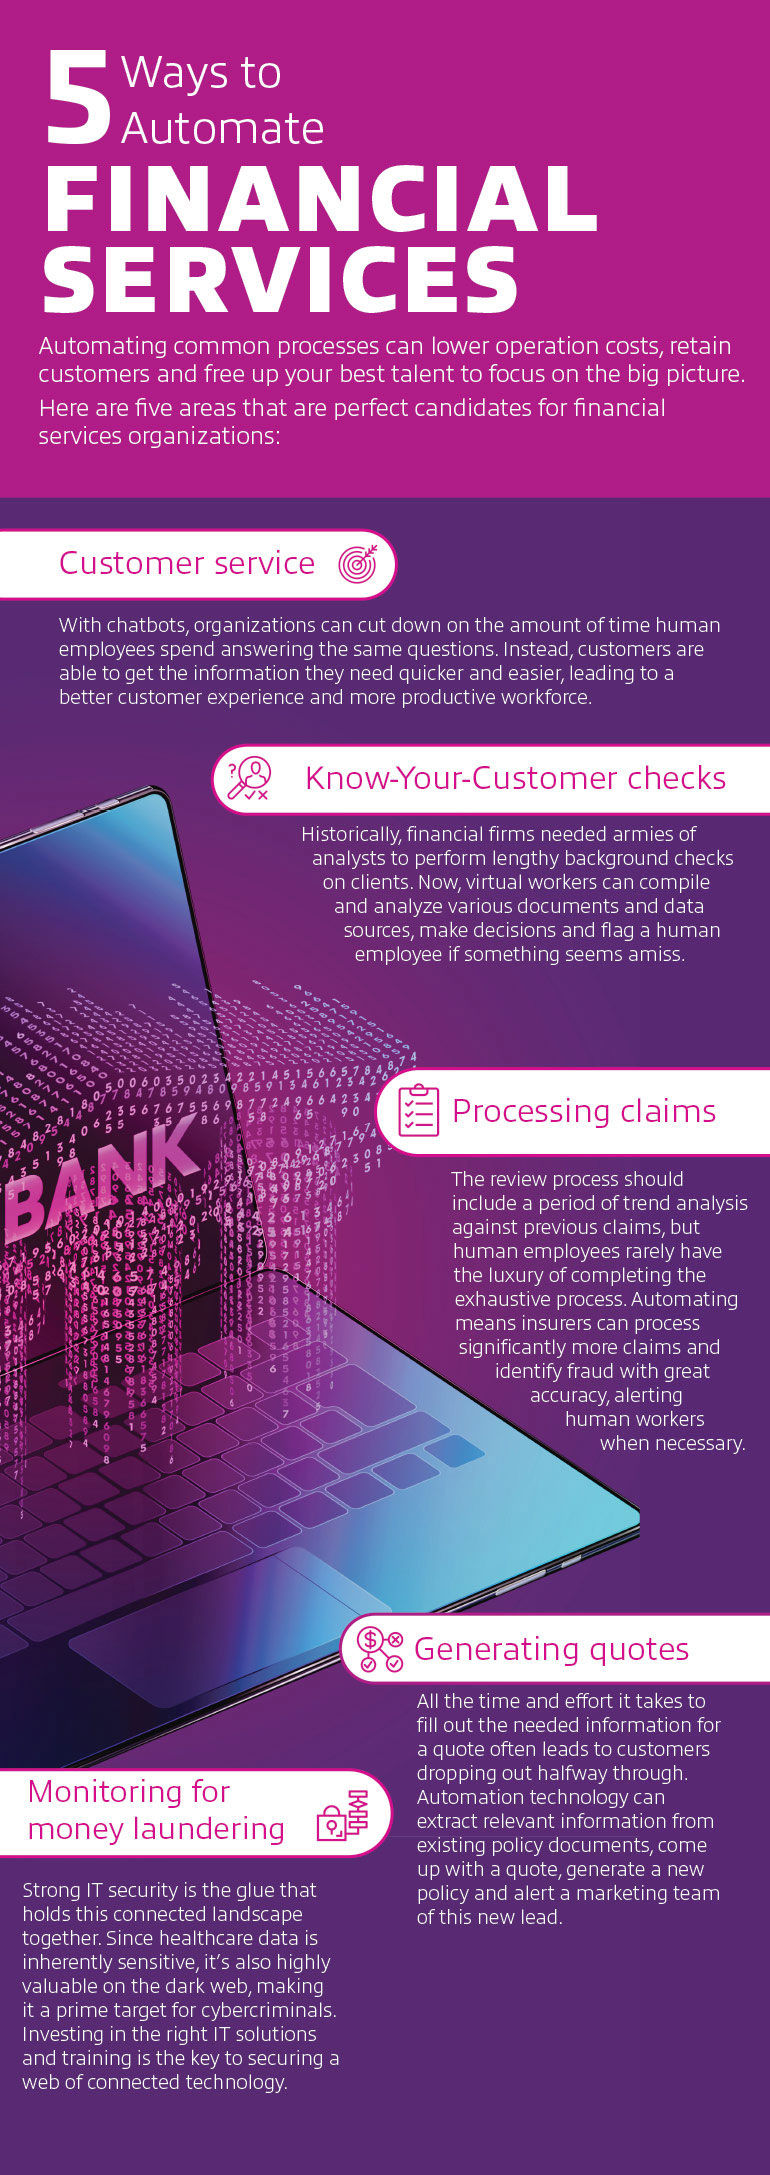 5 Ways to Automate Financial Services infographic as transcribed below